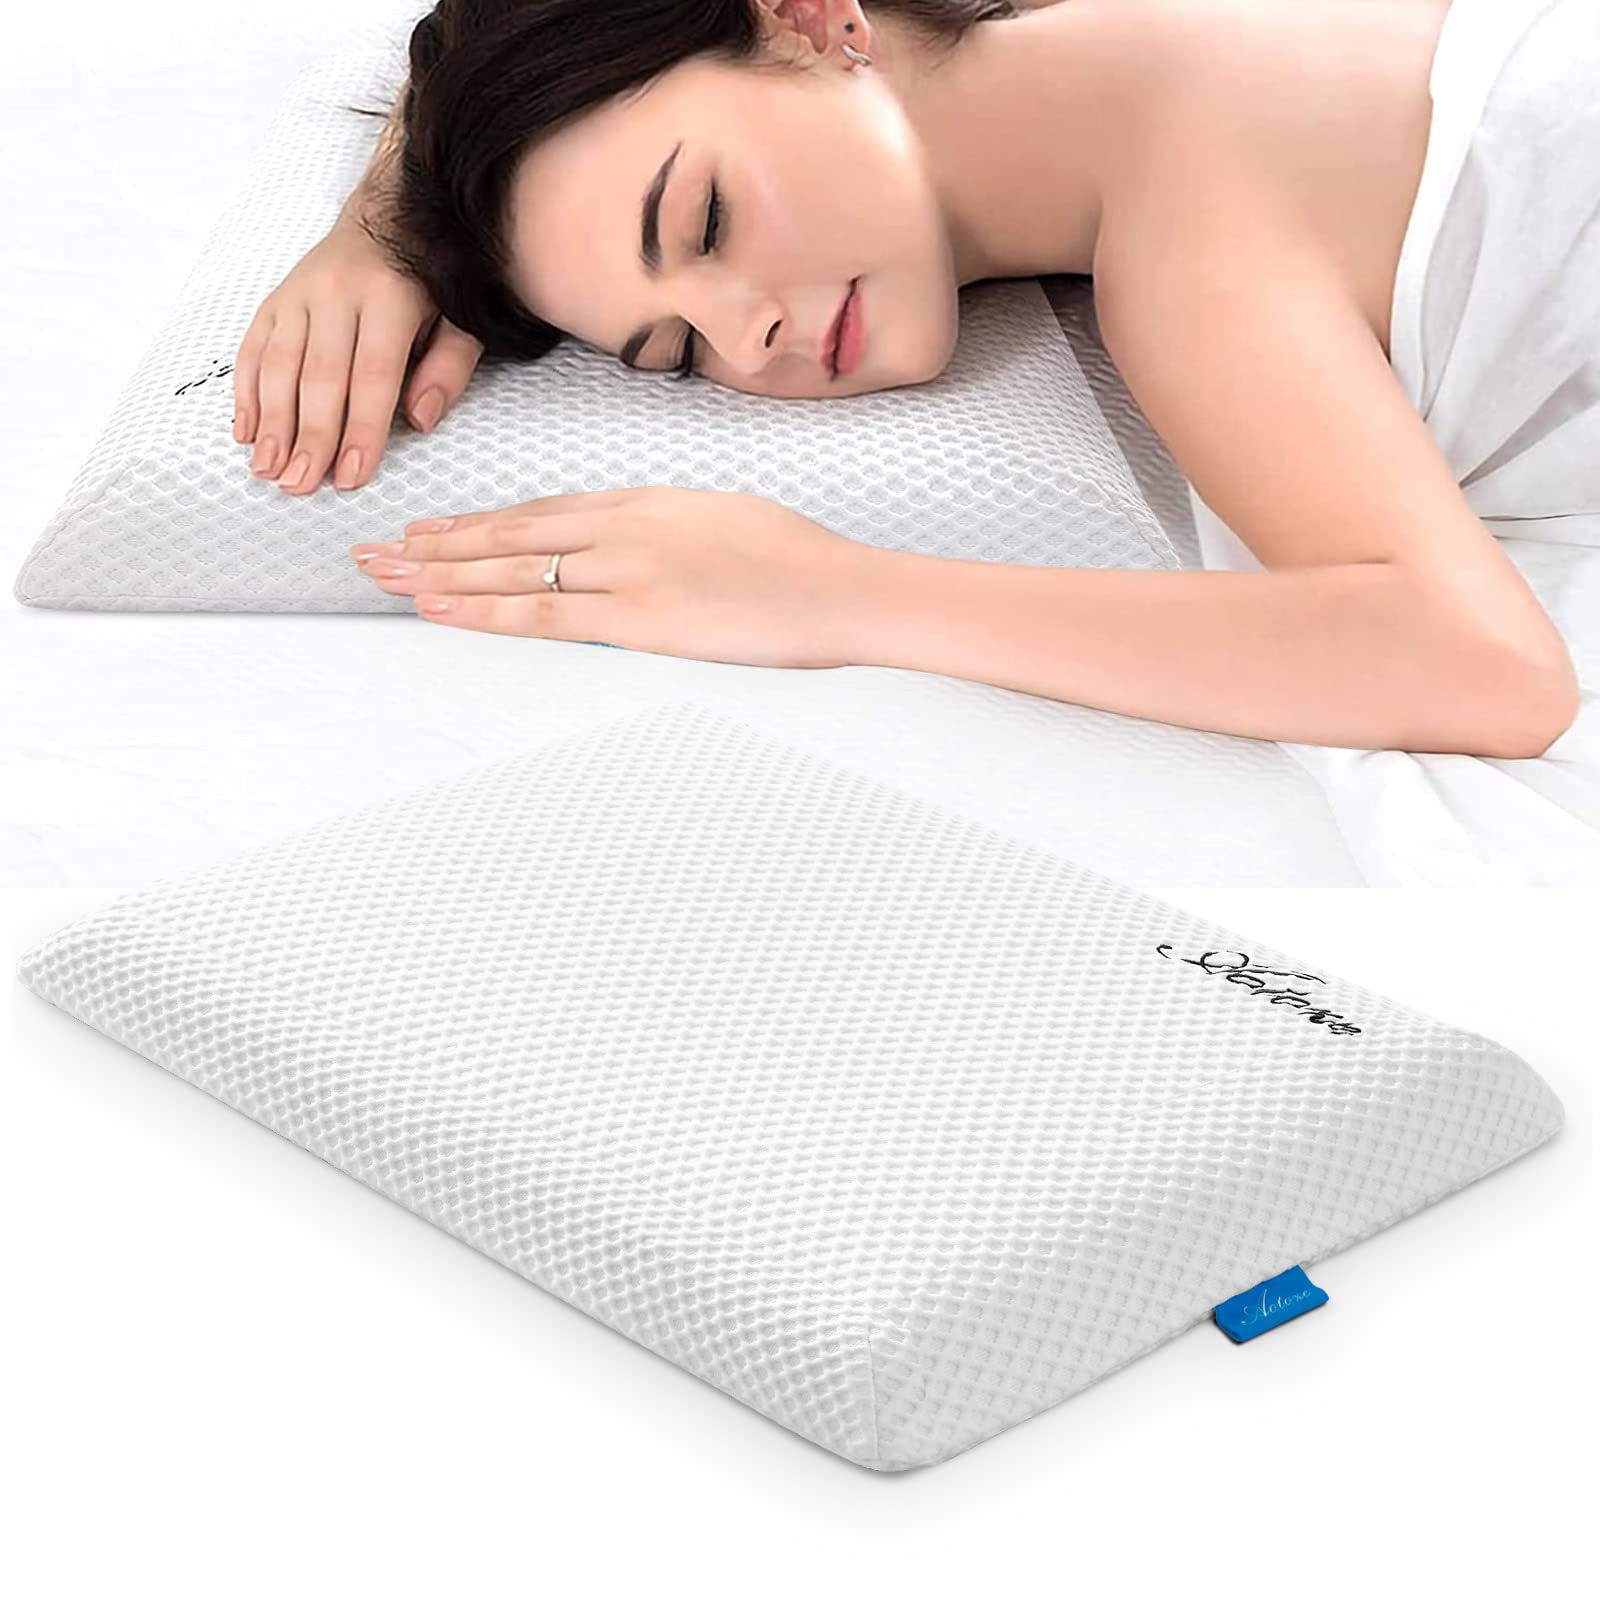 Looking to Buy The Best Heat Press Pillow Near You. Find Out Now